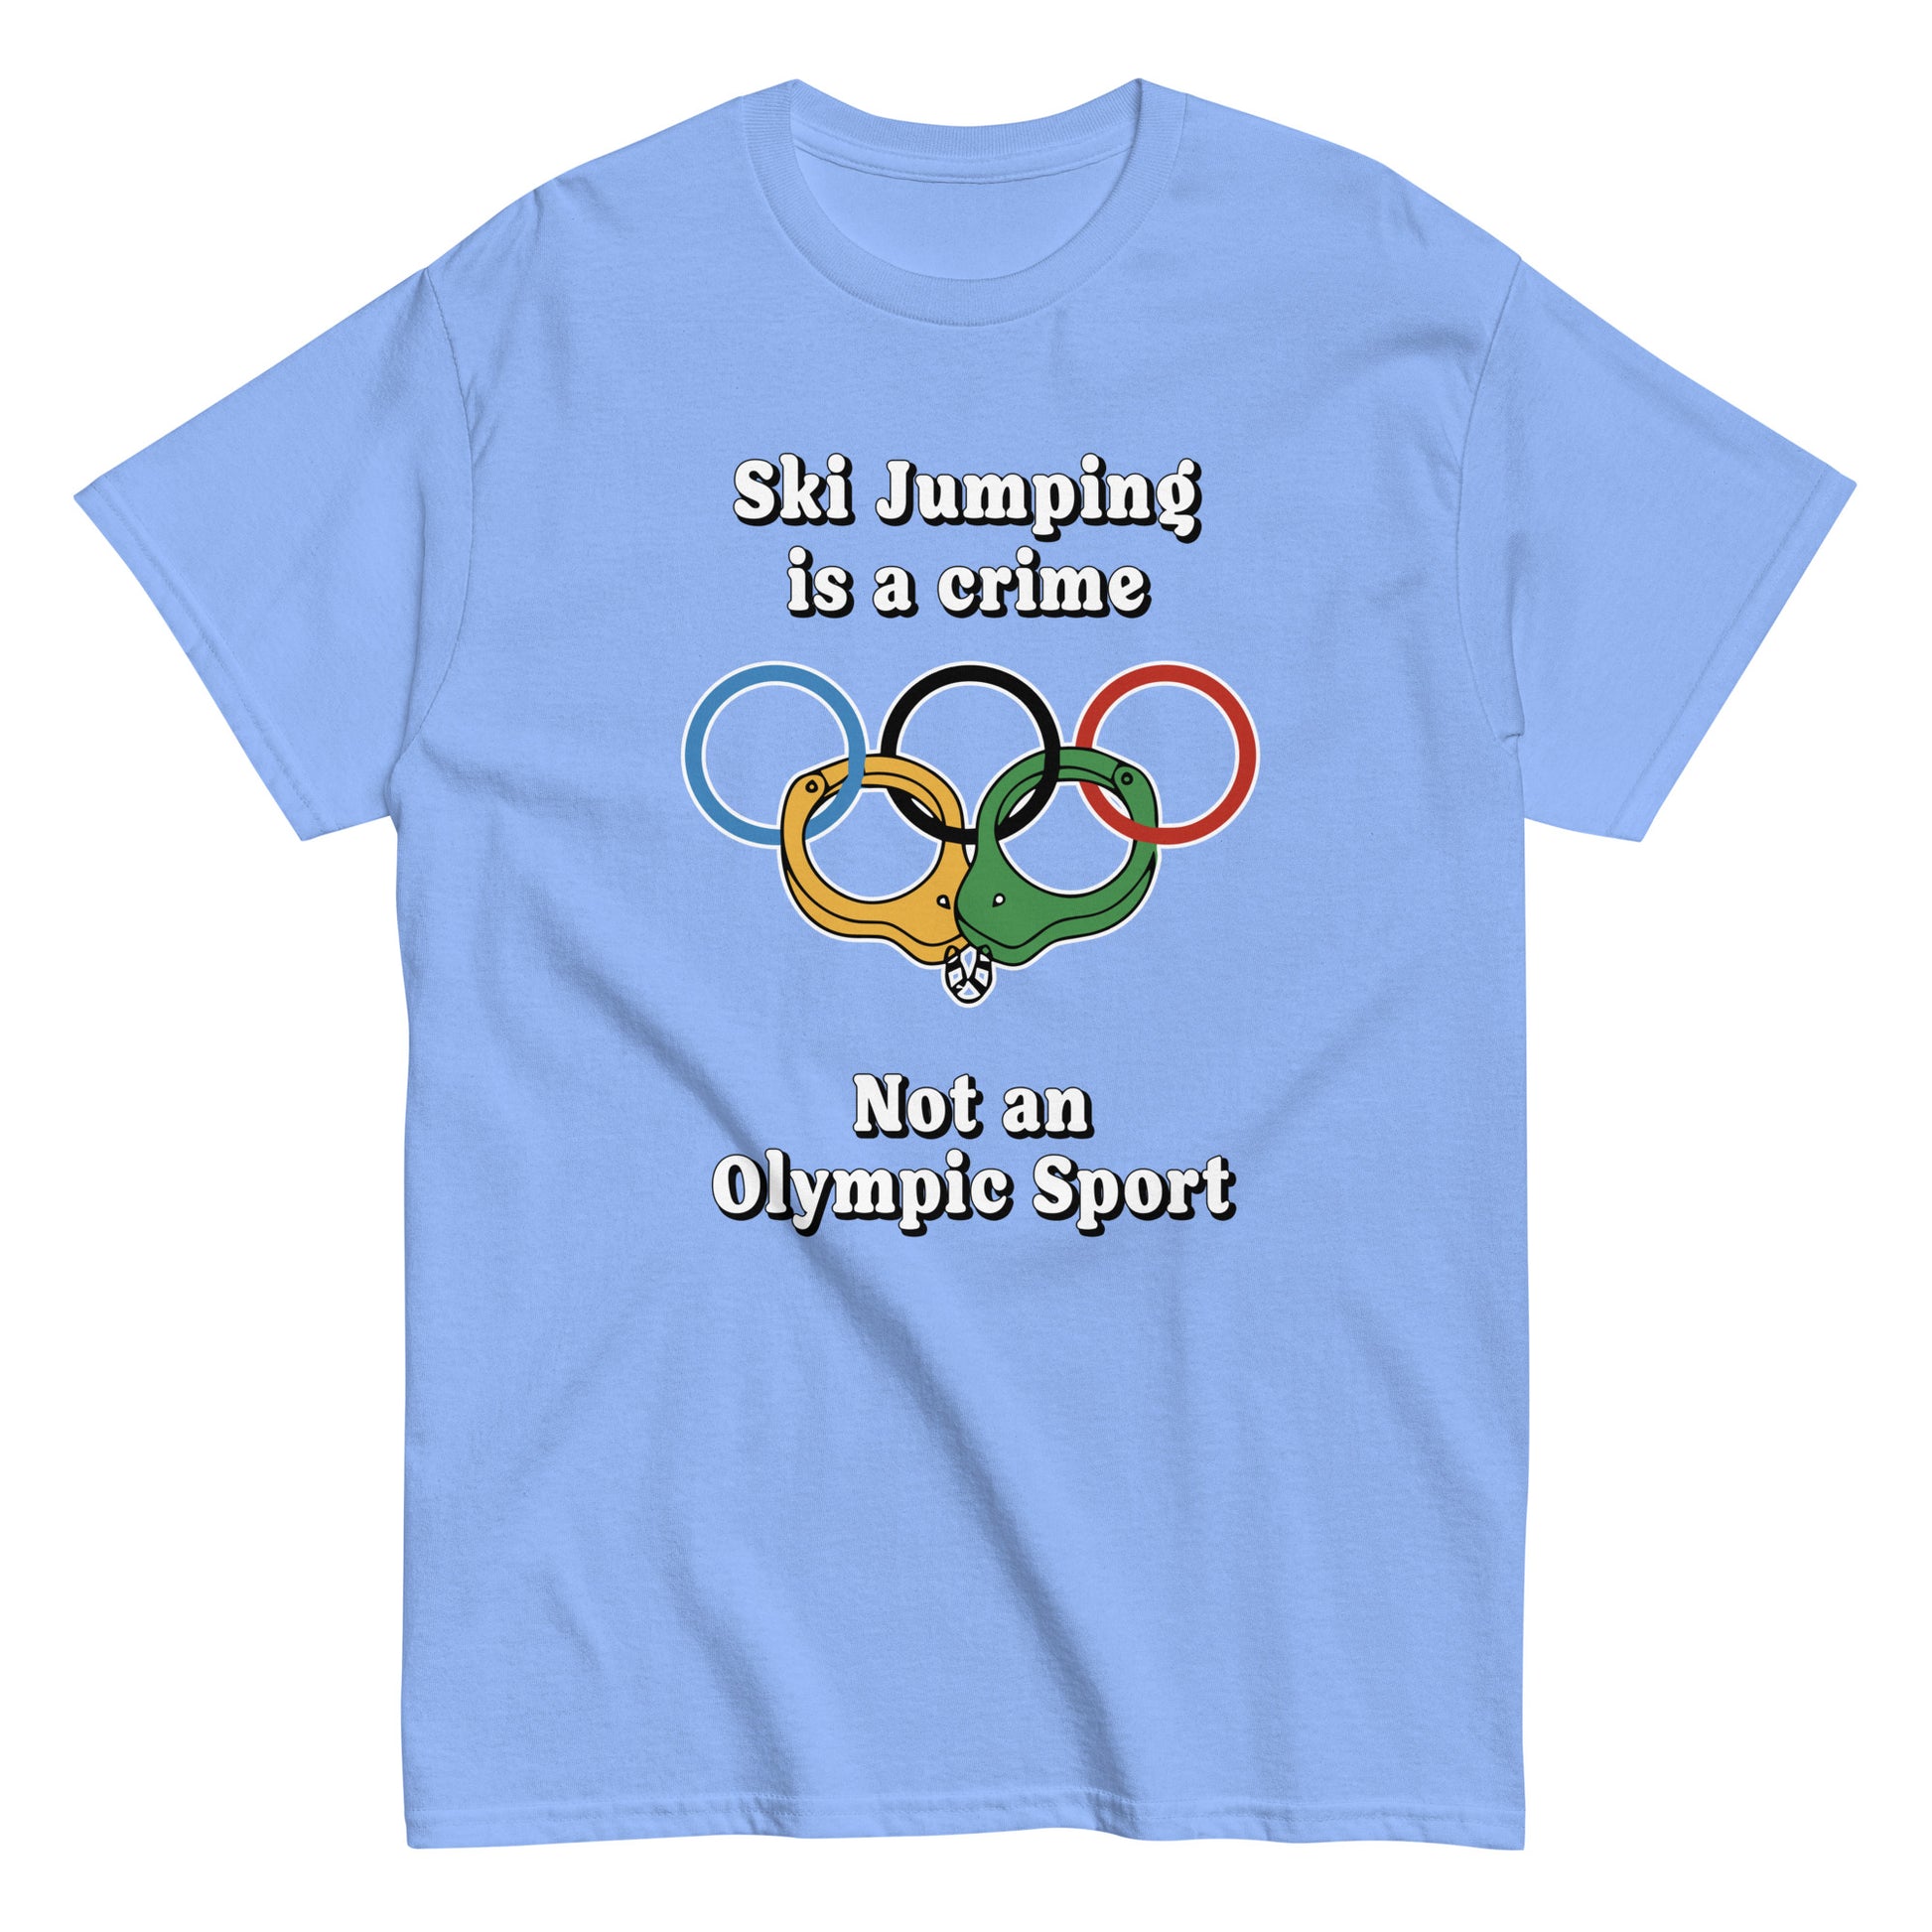 Ski Jumping is a crime not an olympic sport design printed on a t-shirt by Whistler Shirts